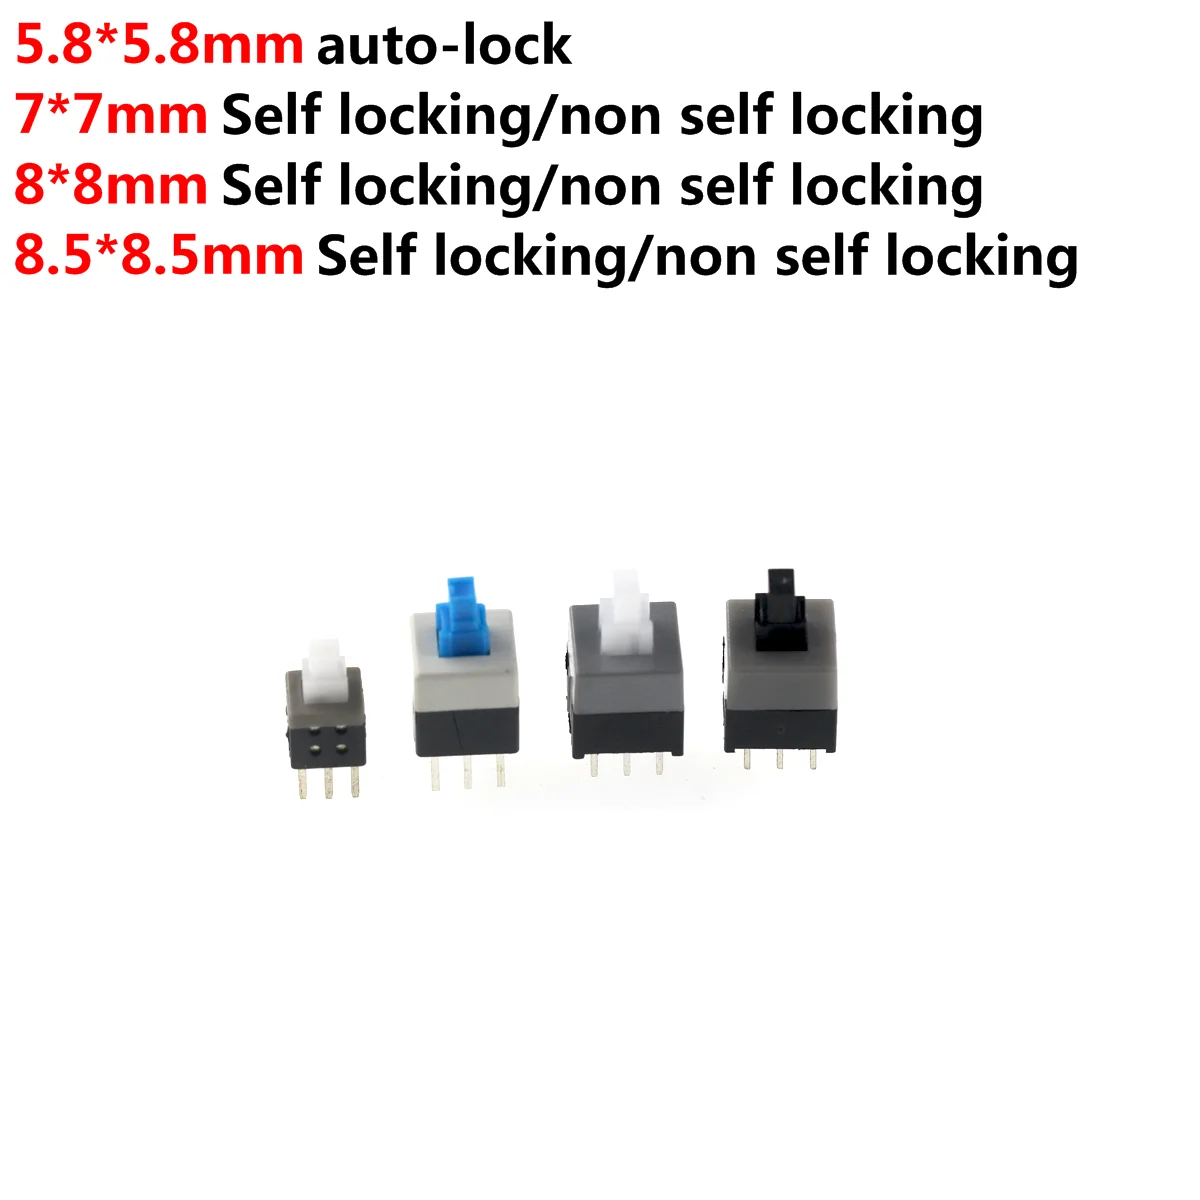 250pcs tactile push button switch remote key micro switch control switches for honda for hyundai for peugeot 100PCS/LOT 5.8x5.8 7x7 8x8 8.5x8.5mm Self Locking / UNlock Push Tactile Power Micro Switch 6 Pin Button Switches